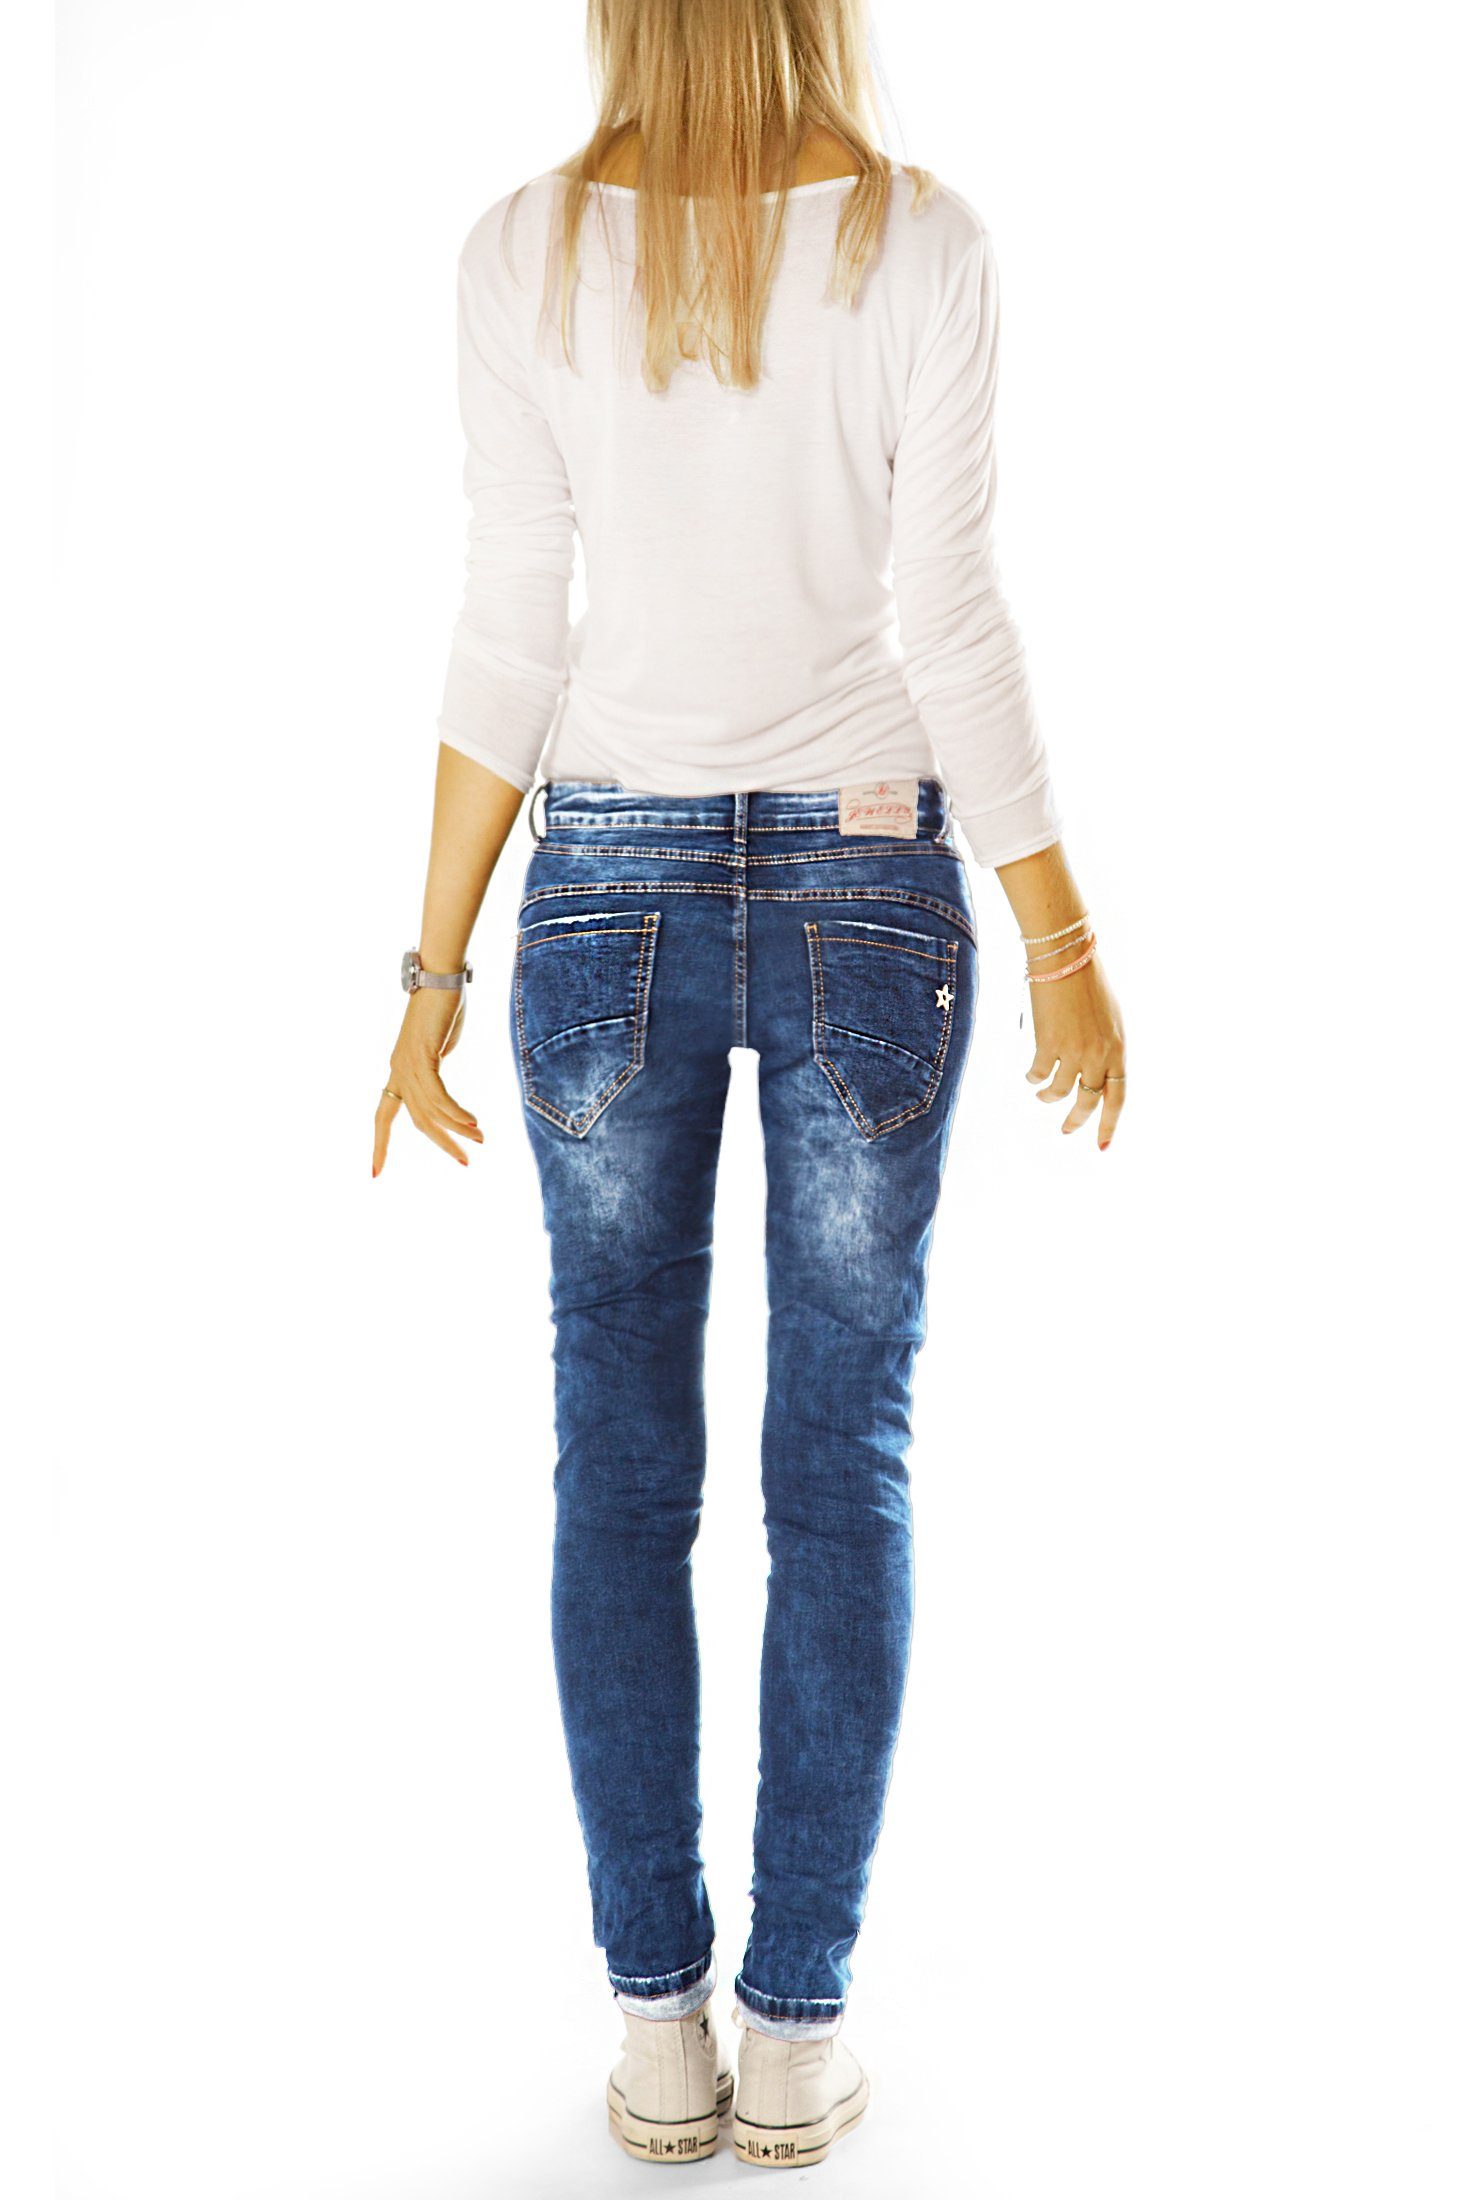 5-Pocket-Style Fit - Slim Hose Look Stretch-Anteil, Slim-fit-Jeans Fit Relaxed be im Hüftjeans j4g-1 styled Damen - mit